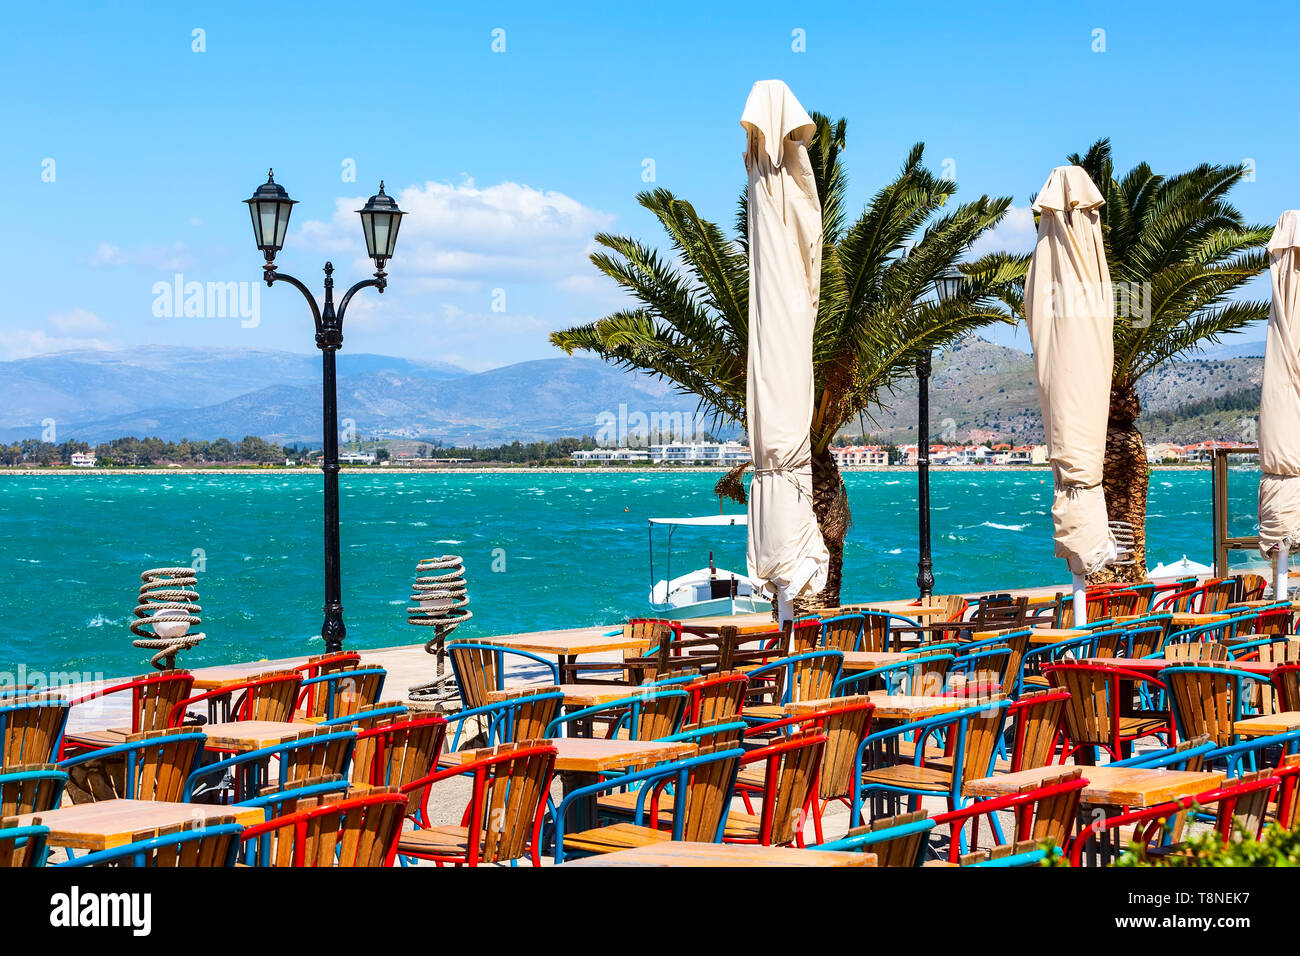 Promenade with colorful tables and chairs in street tavern restaurant, palm trees and sea in Nafplio or Nafplion, Greece, Peloponnese Stock Photo